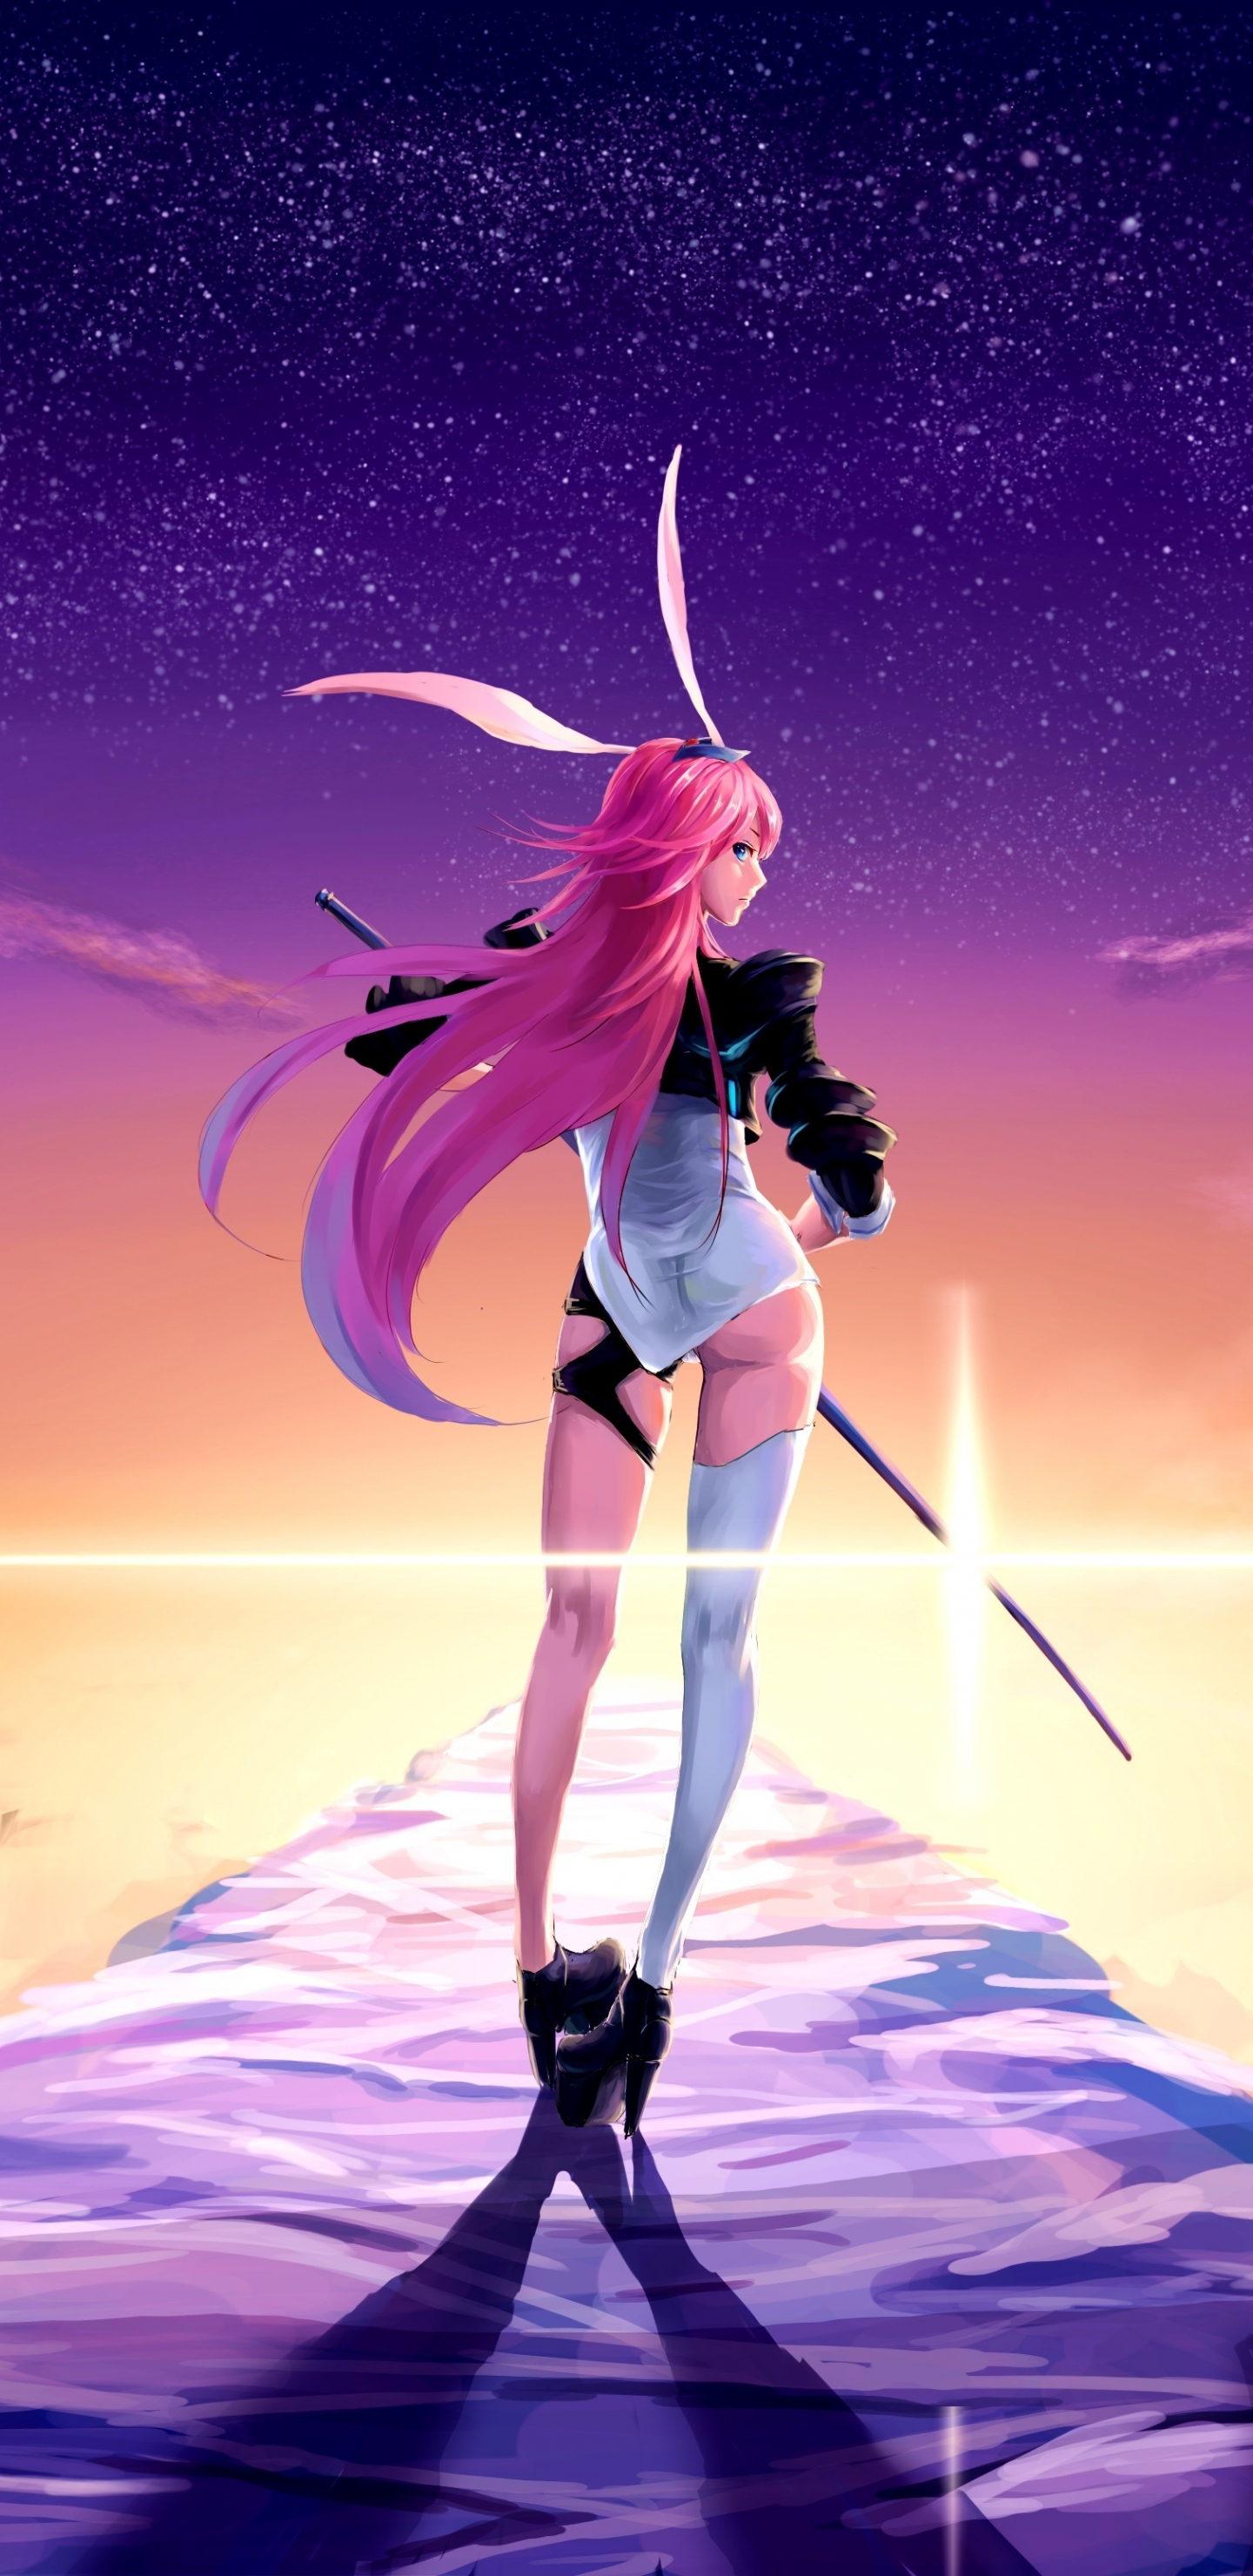 13+ Hoodie Anime Girl Wallpapers for iPhone and Android by William Russell